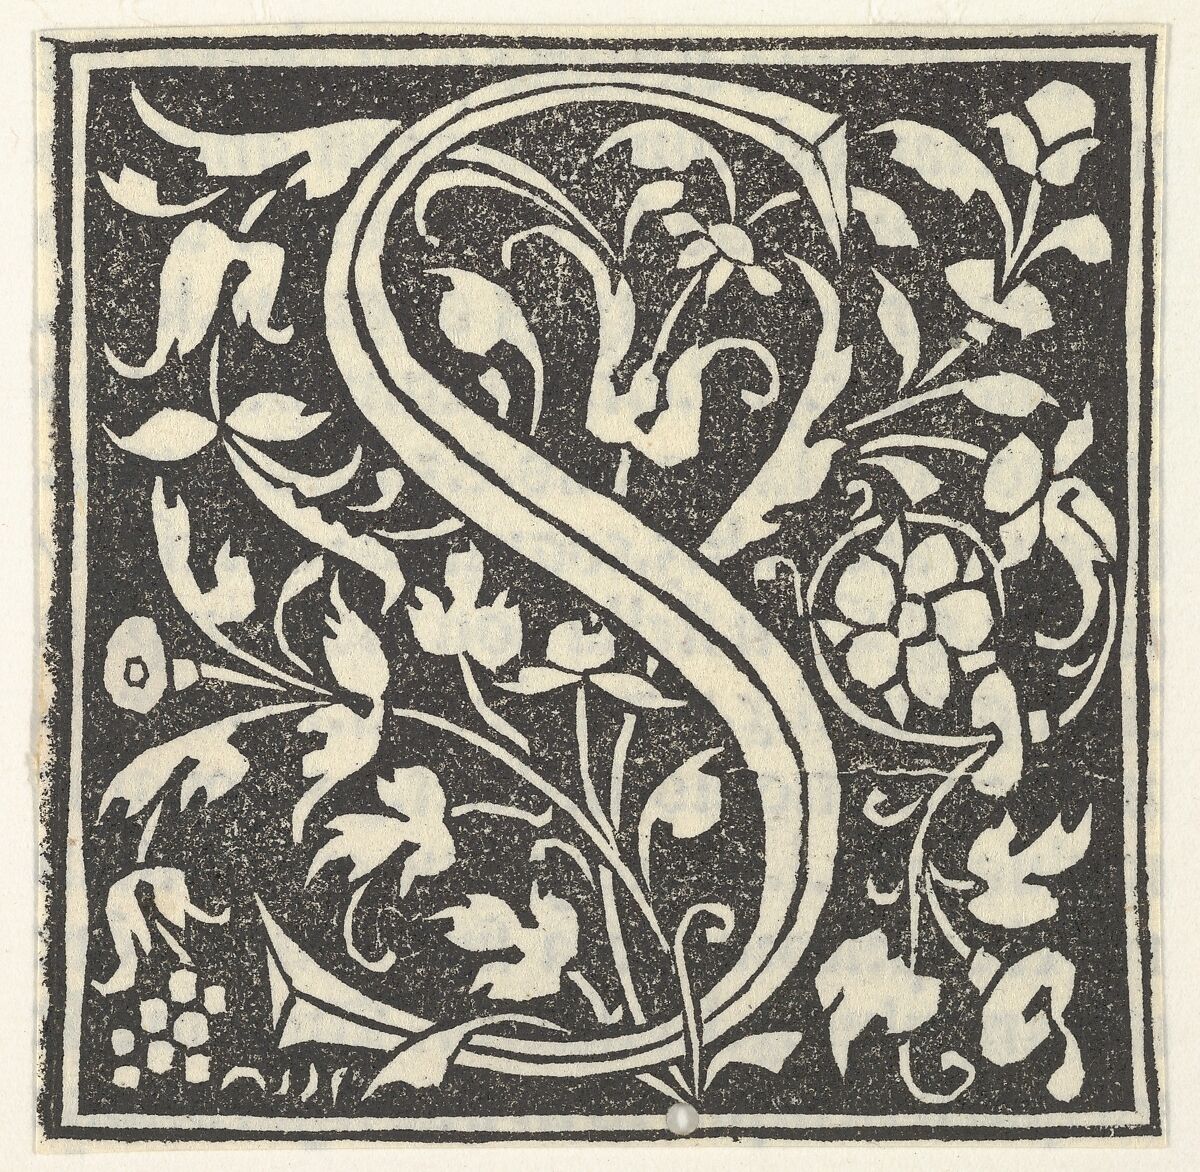 Initial letter S, Anonymous, Italian, 15th century, Woodcut 